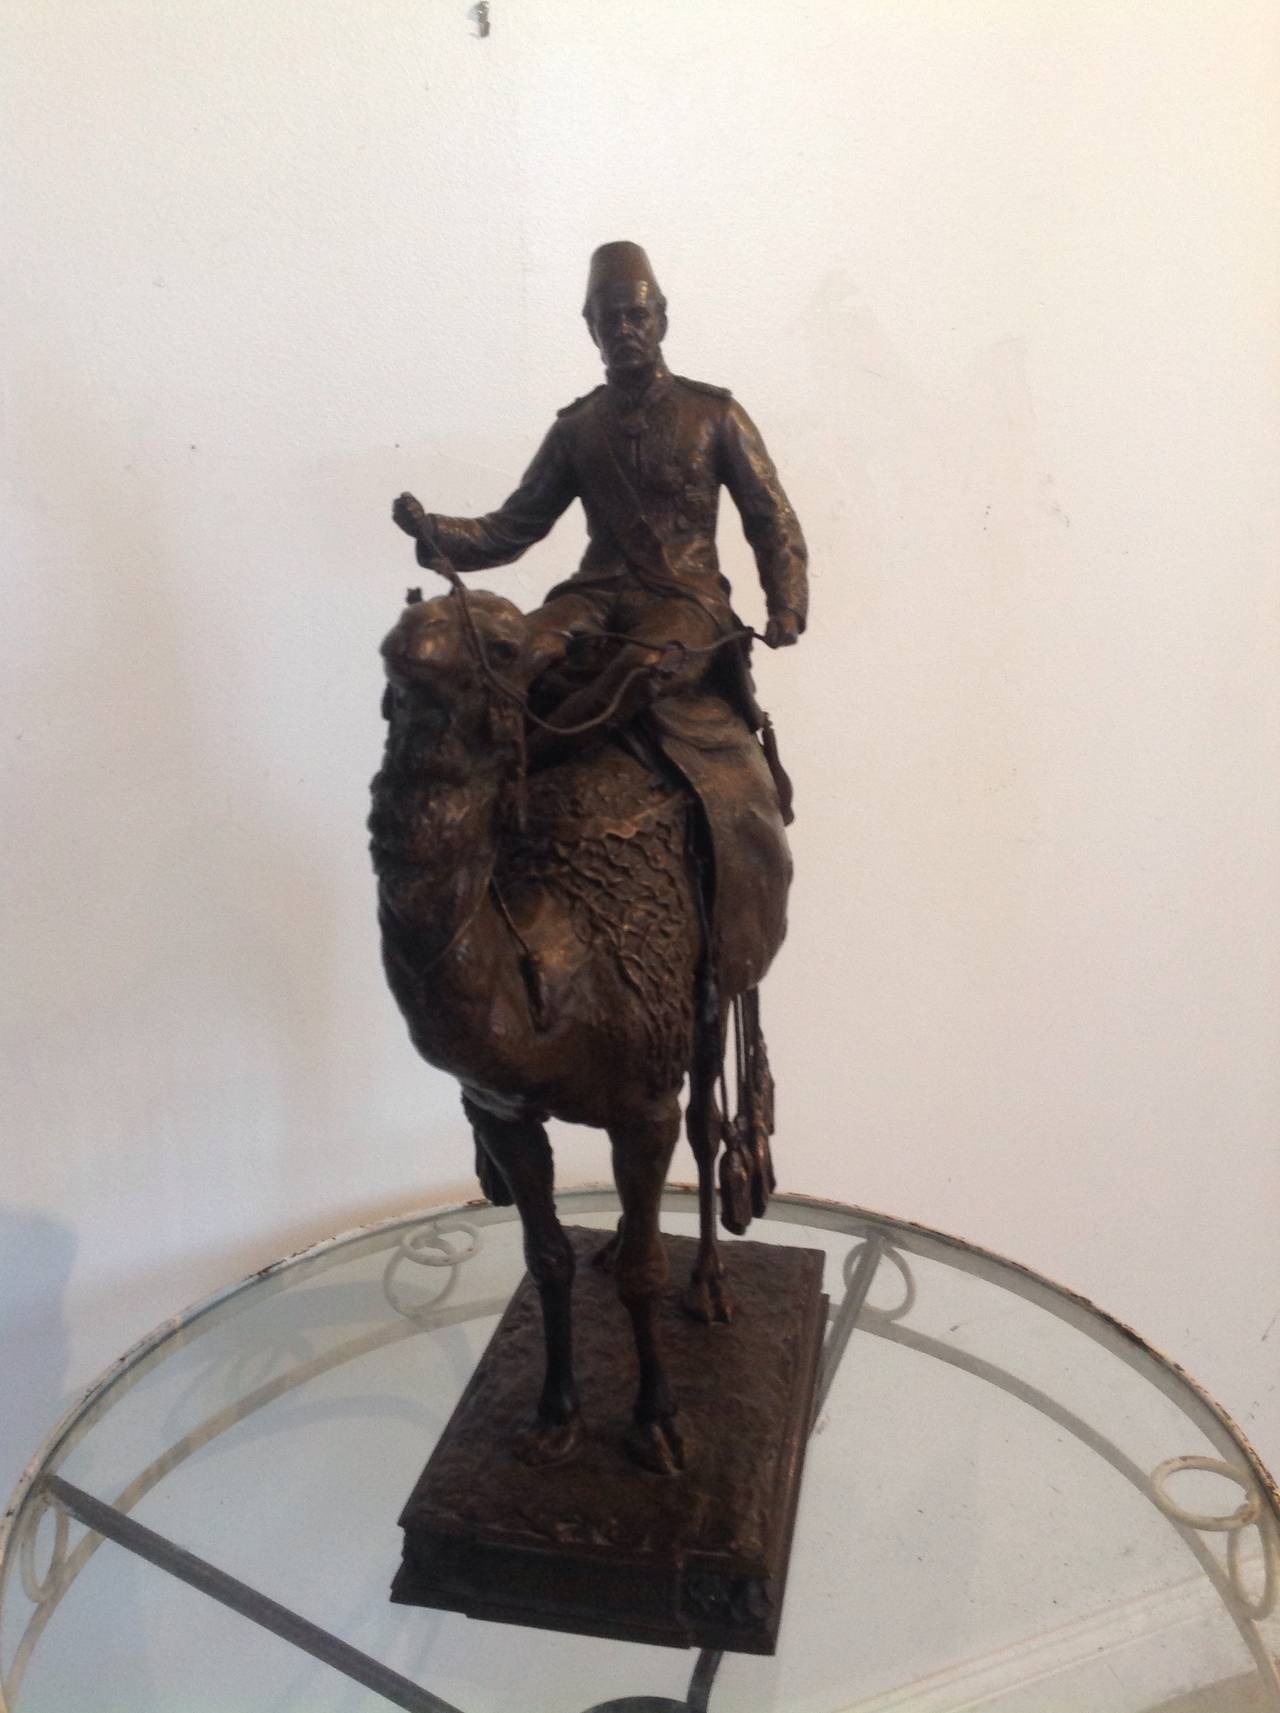 A rare bronze of General Gordon on Camel back by English sculptor Edward Onslow Ford ( 1852-1901) with a dark brown patina inscribed E. Onslow ford on the base.
This bronze is probably a maquette for the monument commemorating Major General Charles